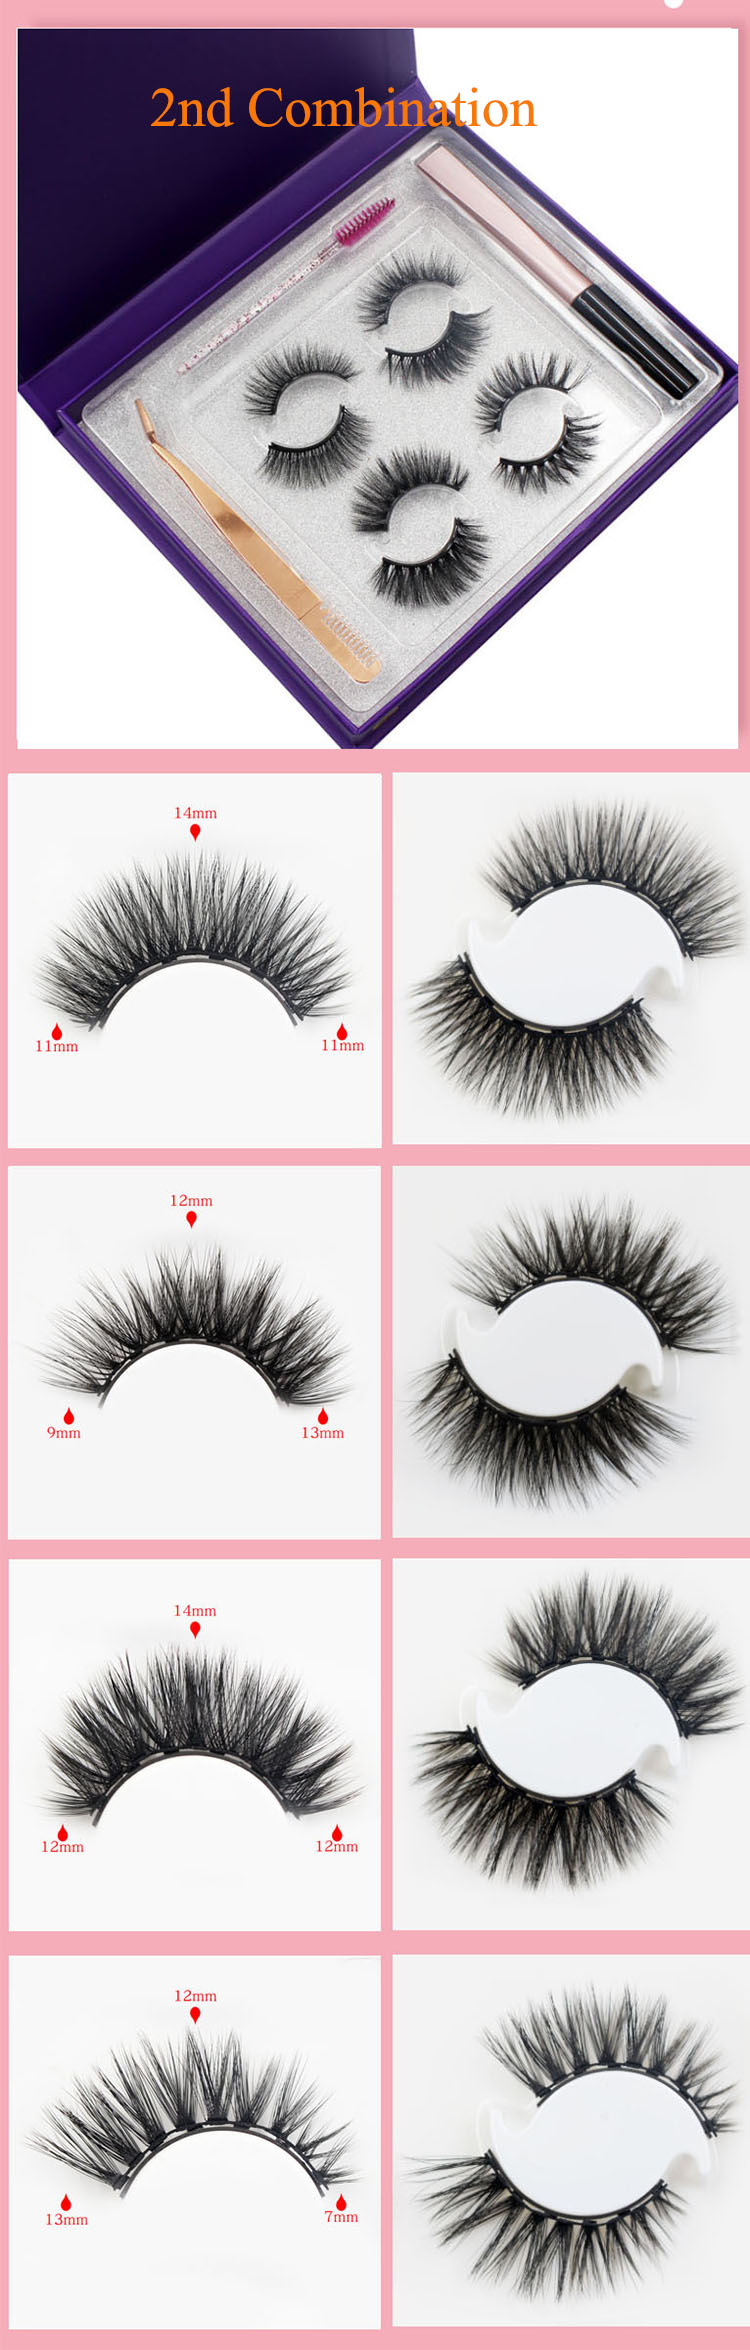 other-combination-3d-faux-mink-magnetic-eyelashes-factory.jpg